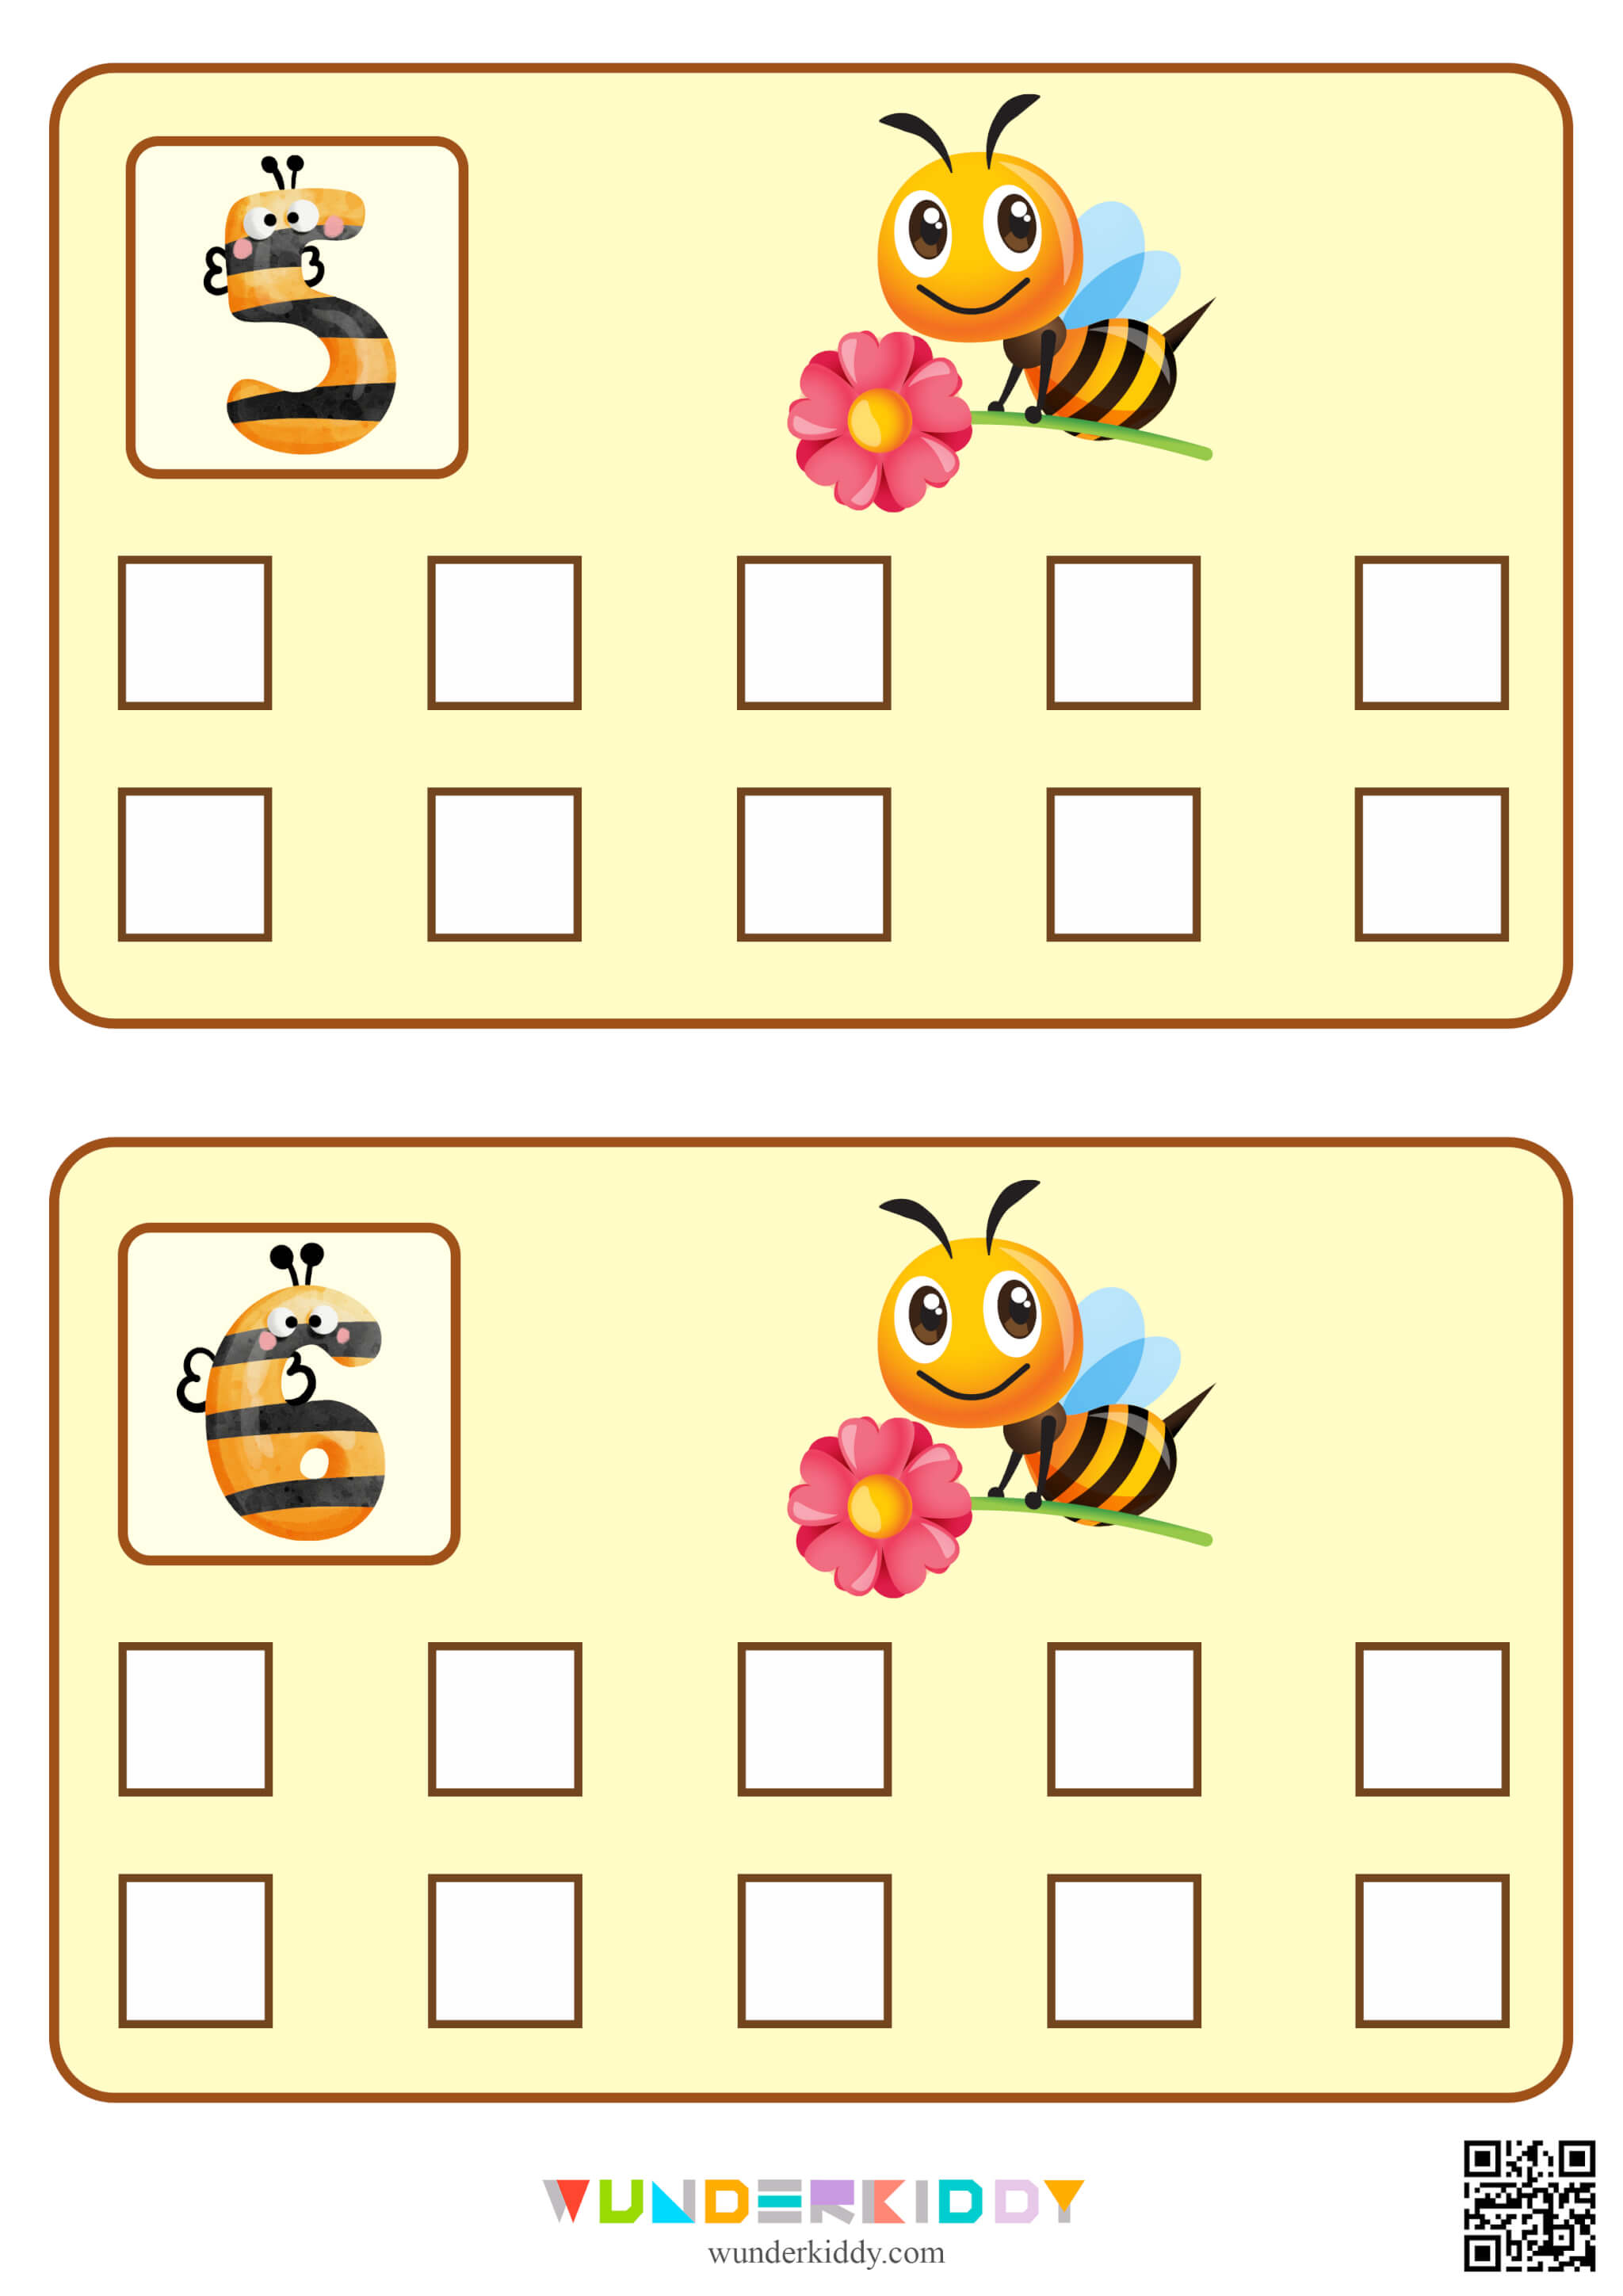 Worksheets «Counting bees» - Image 4